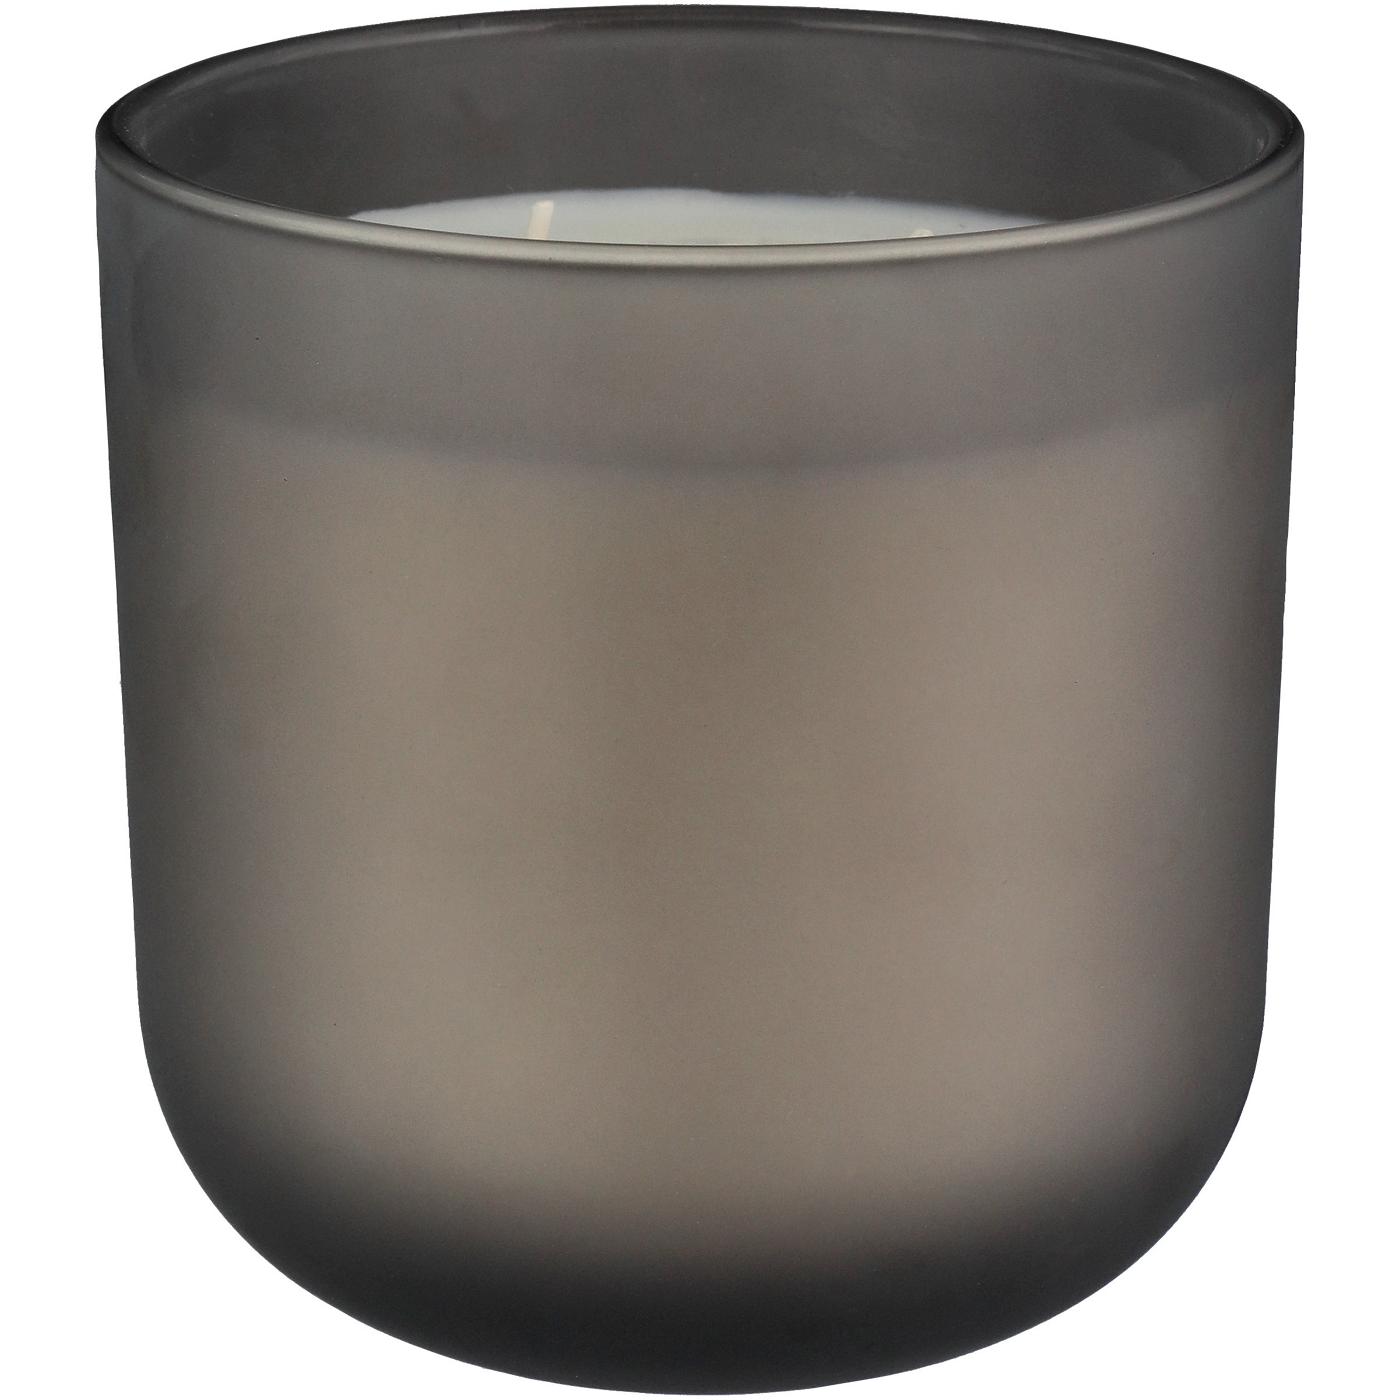 Haven + Key Tobacco & Patchouli Scented Candle; image 1 of 2